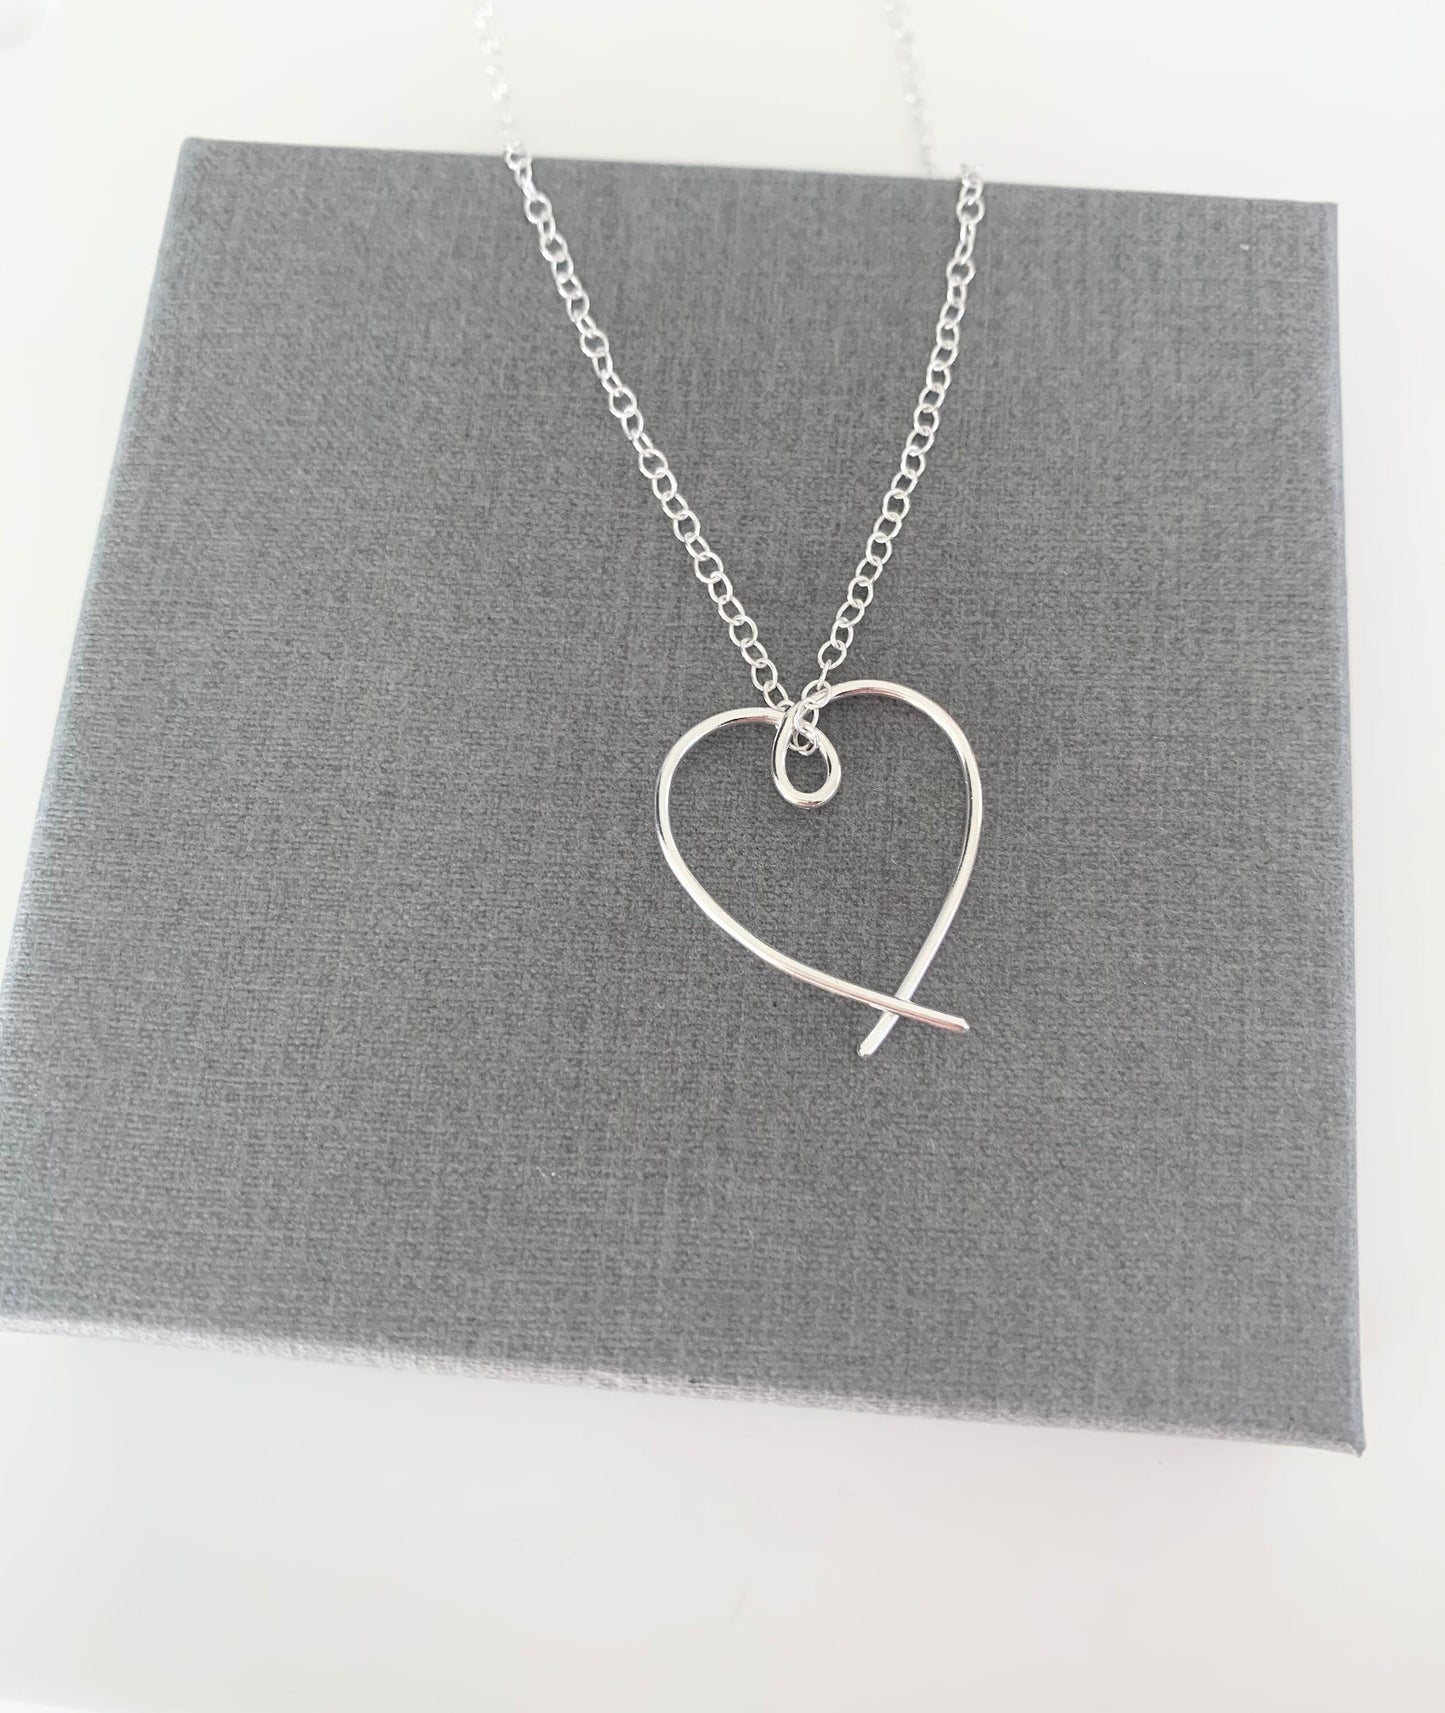 Small silver heart necklace